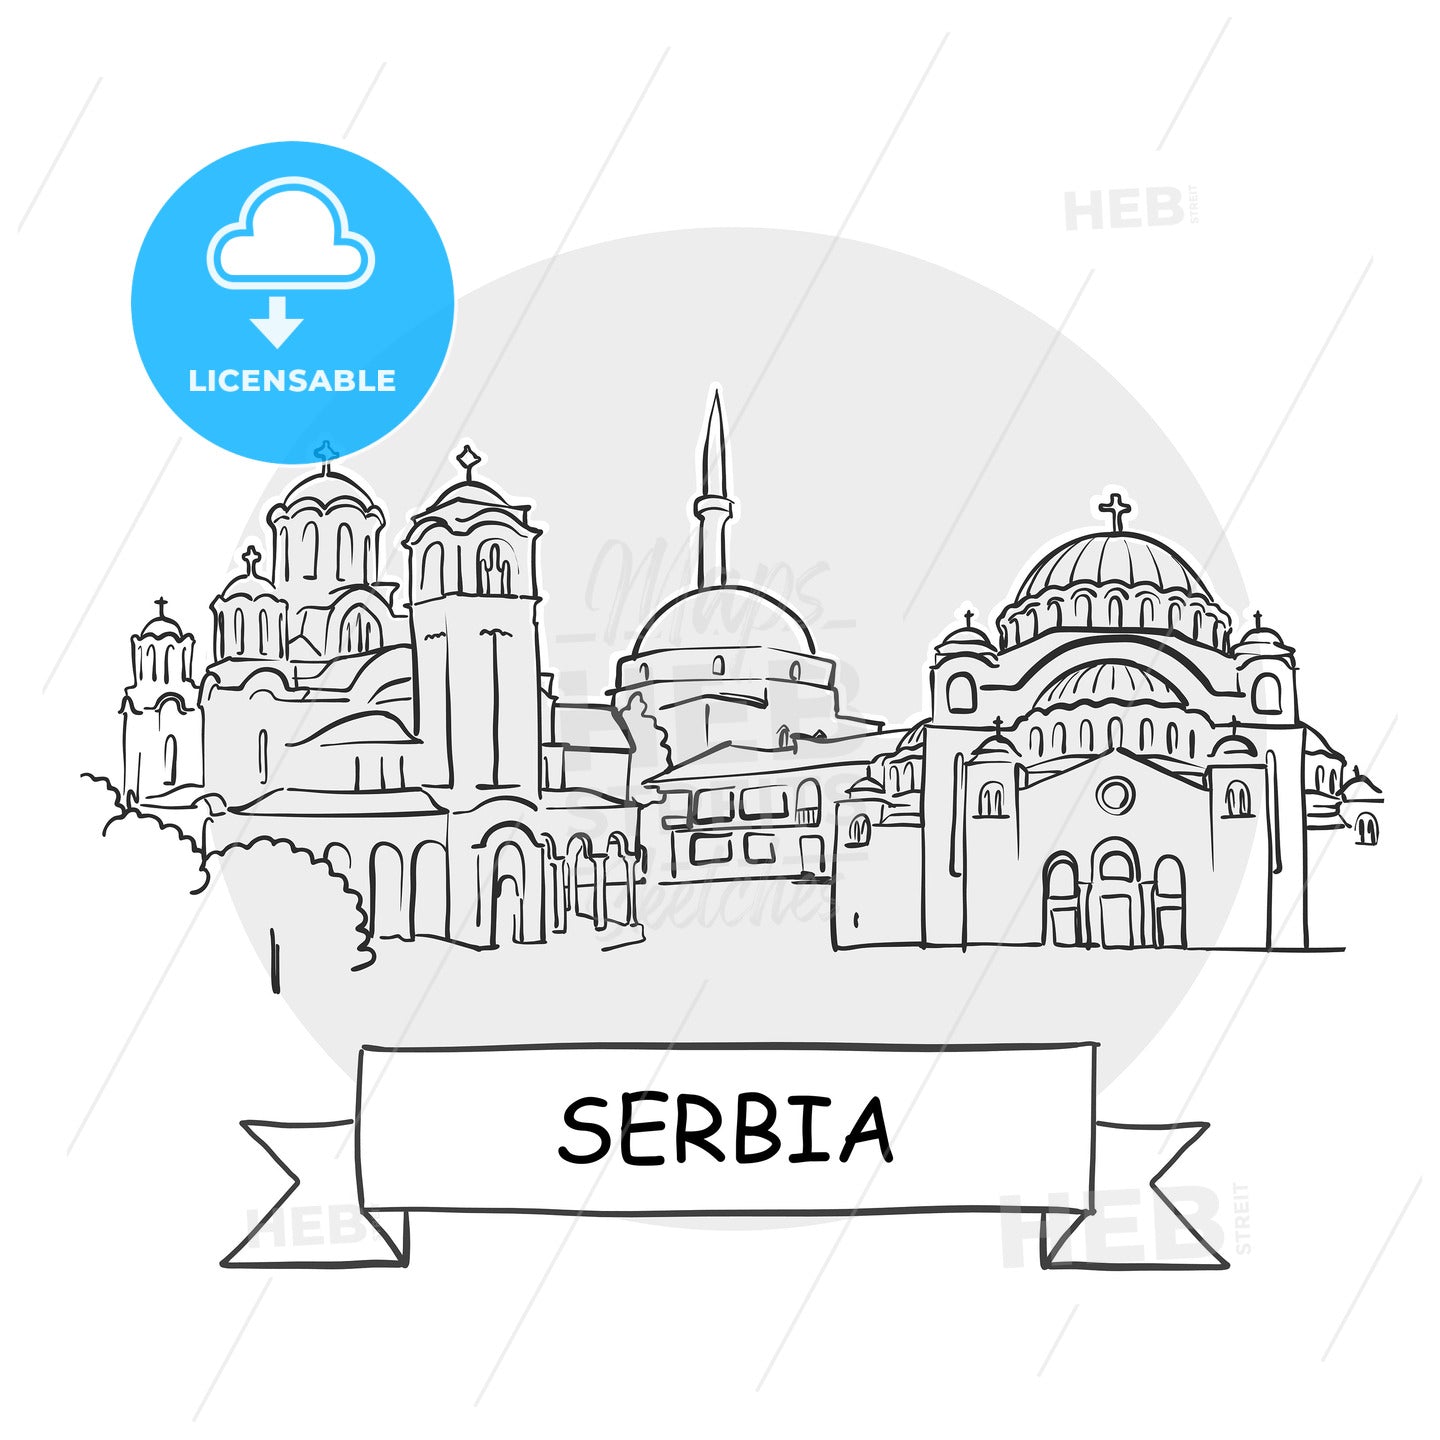 Serbia hand-drawn urban vector sign – instant download